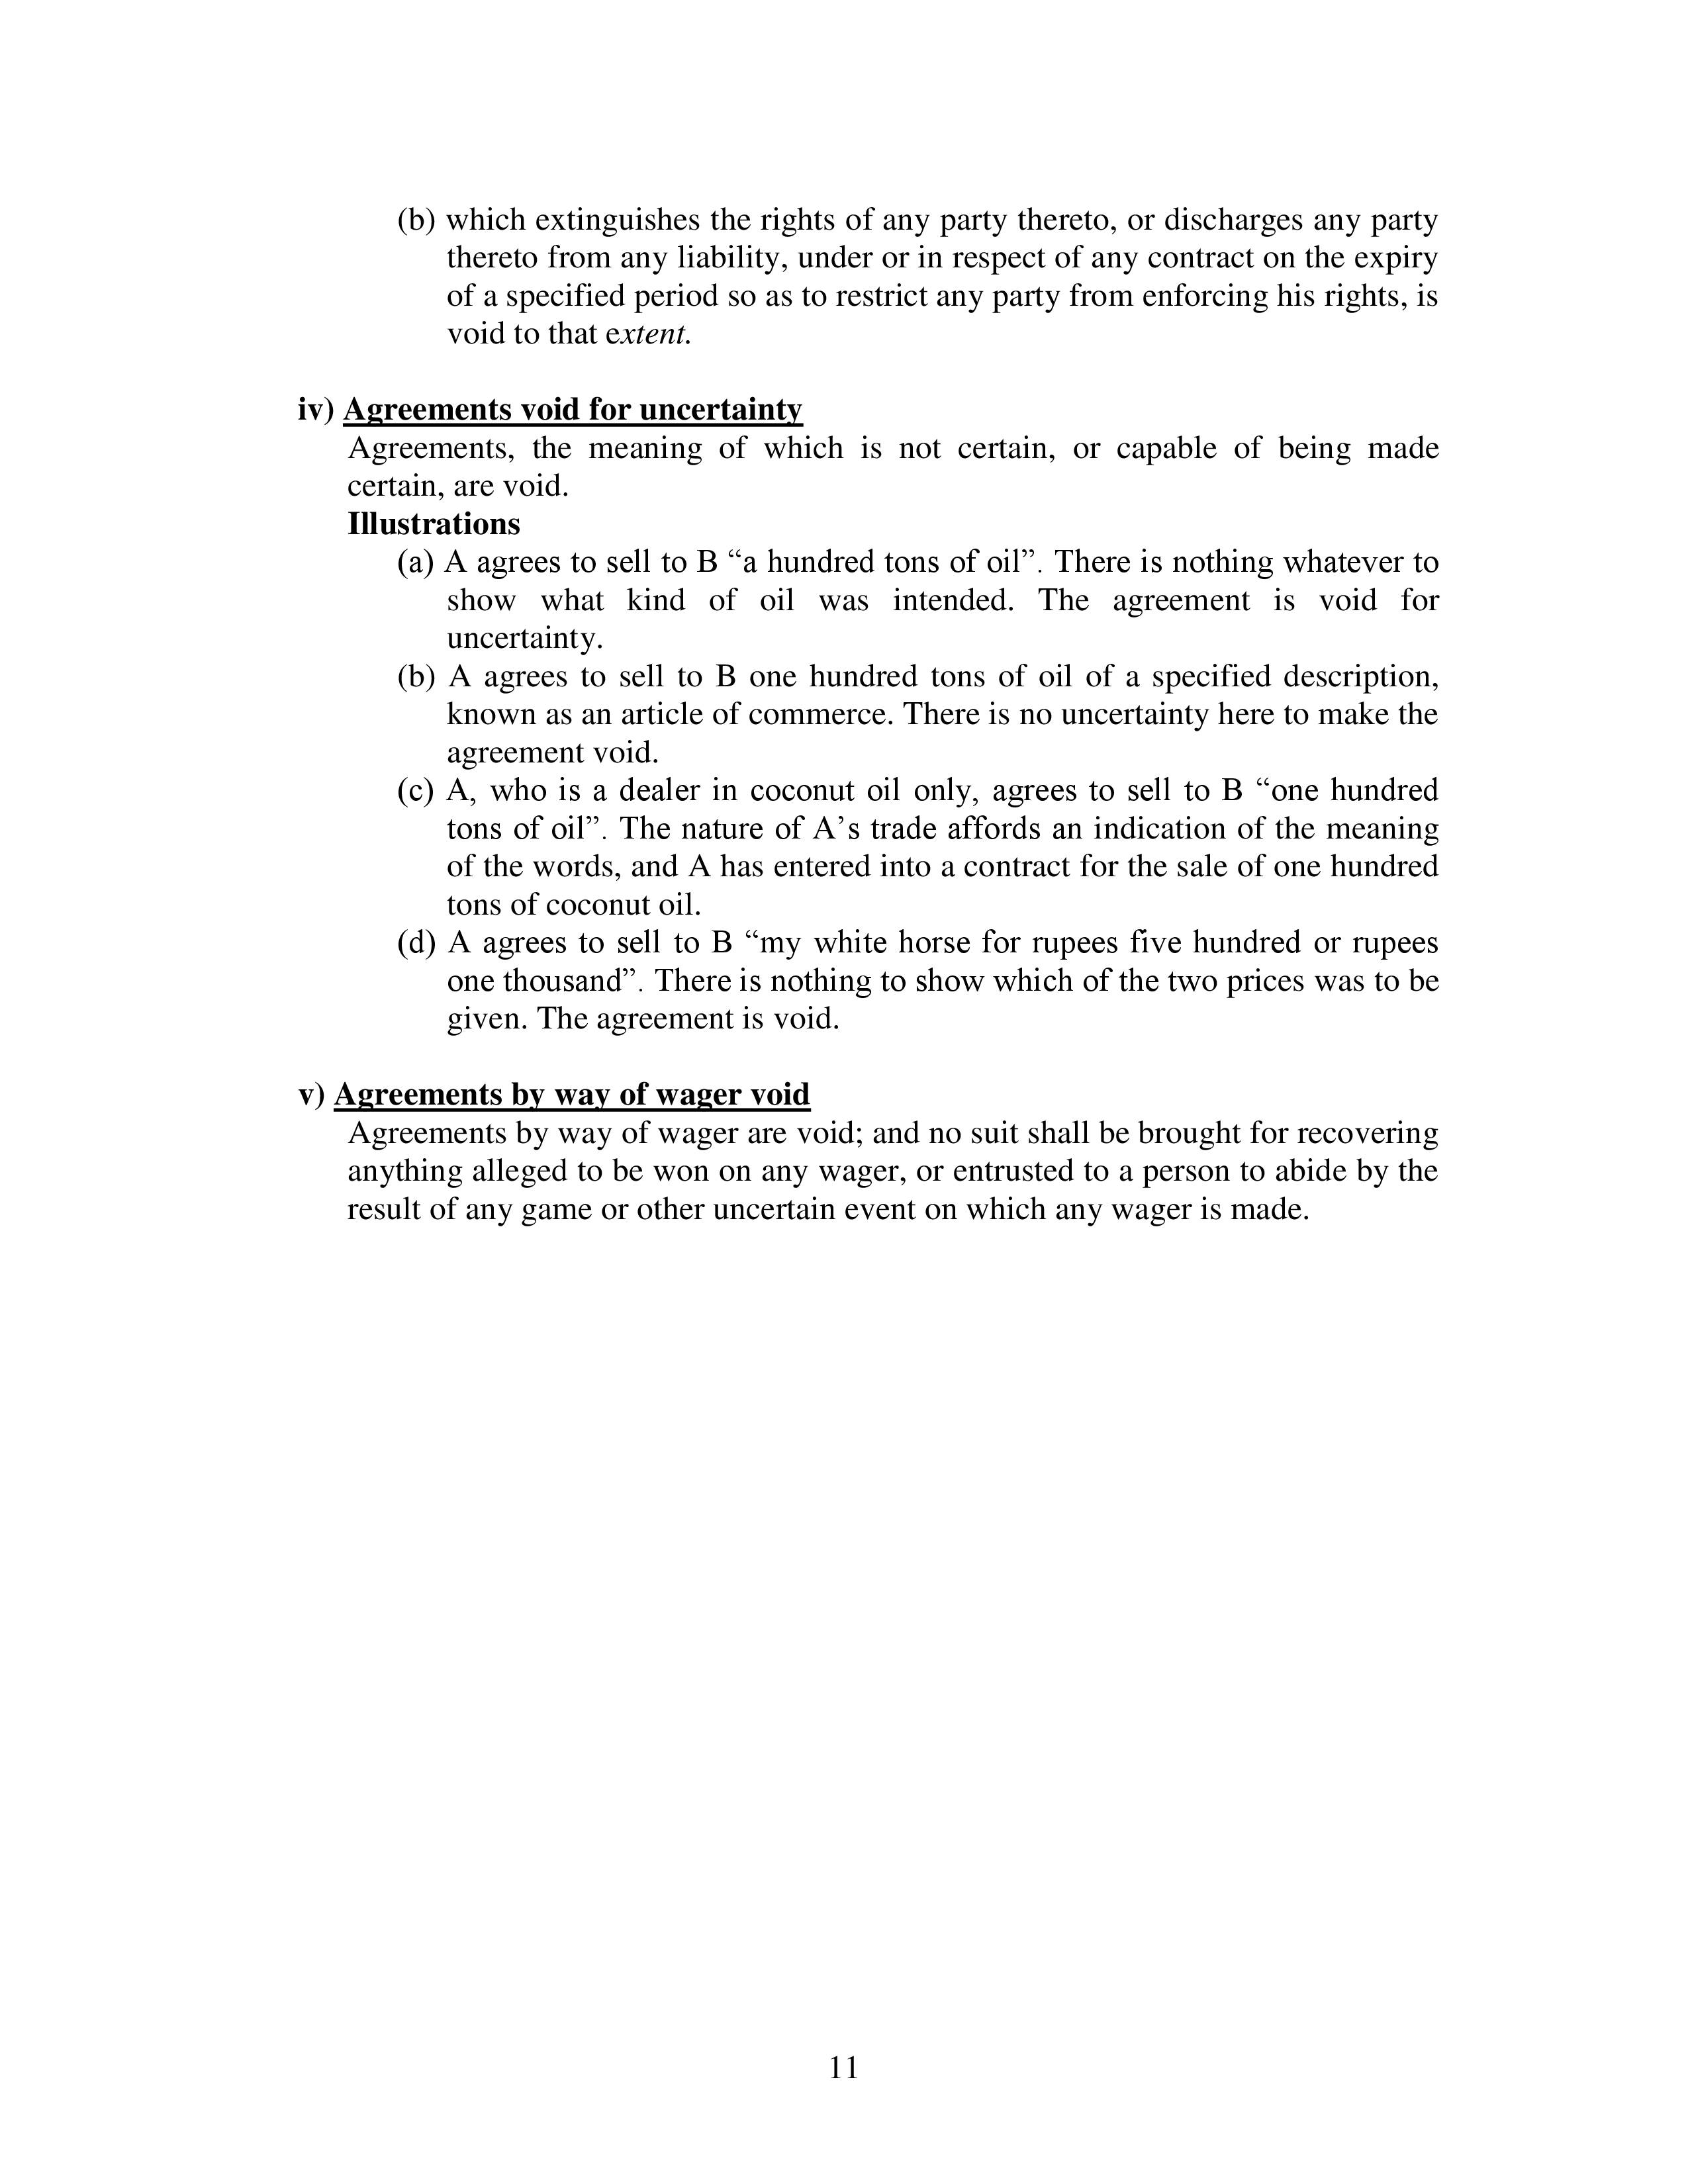 Agreement By Way Of Wager Indian Contract Act Notes